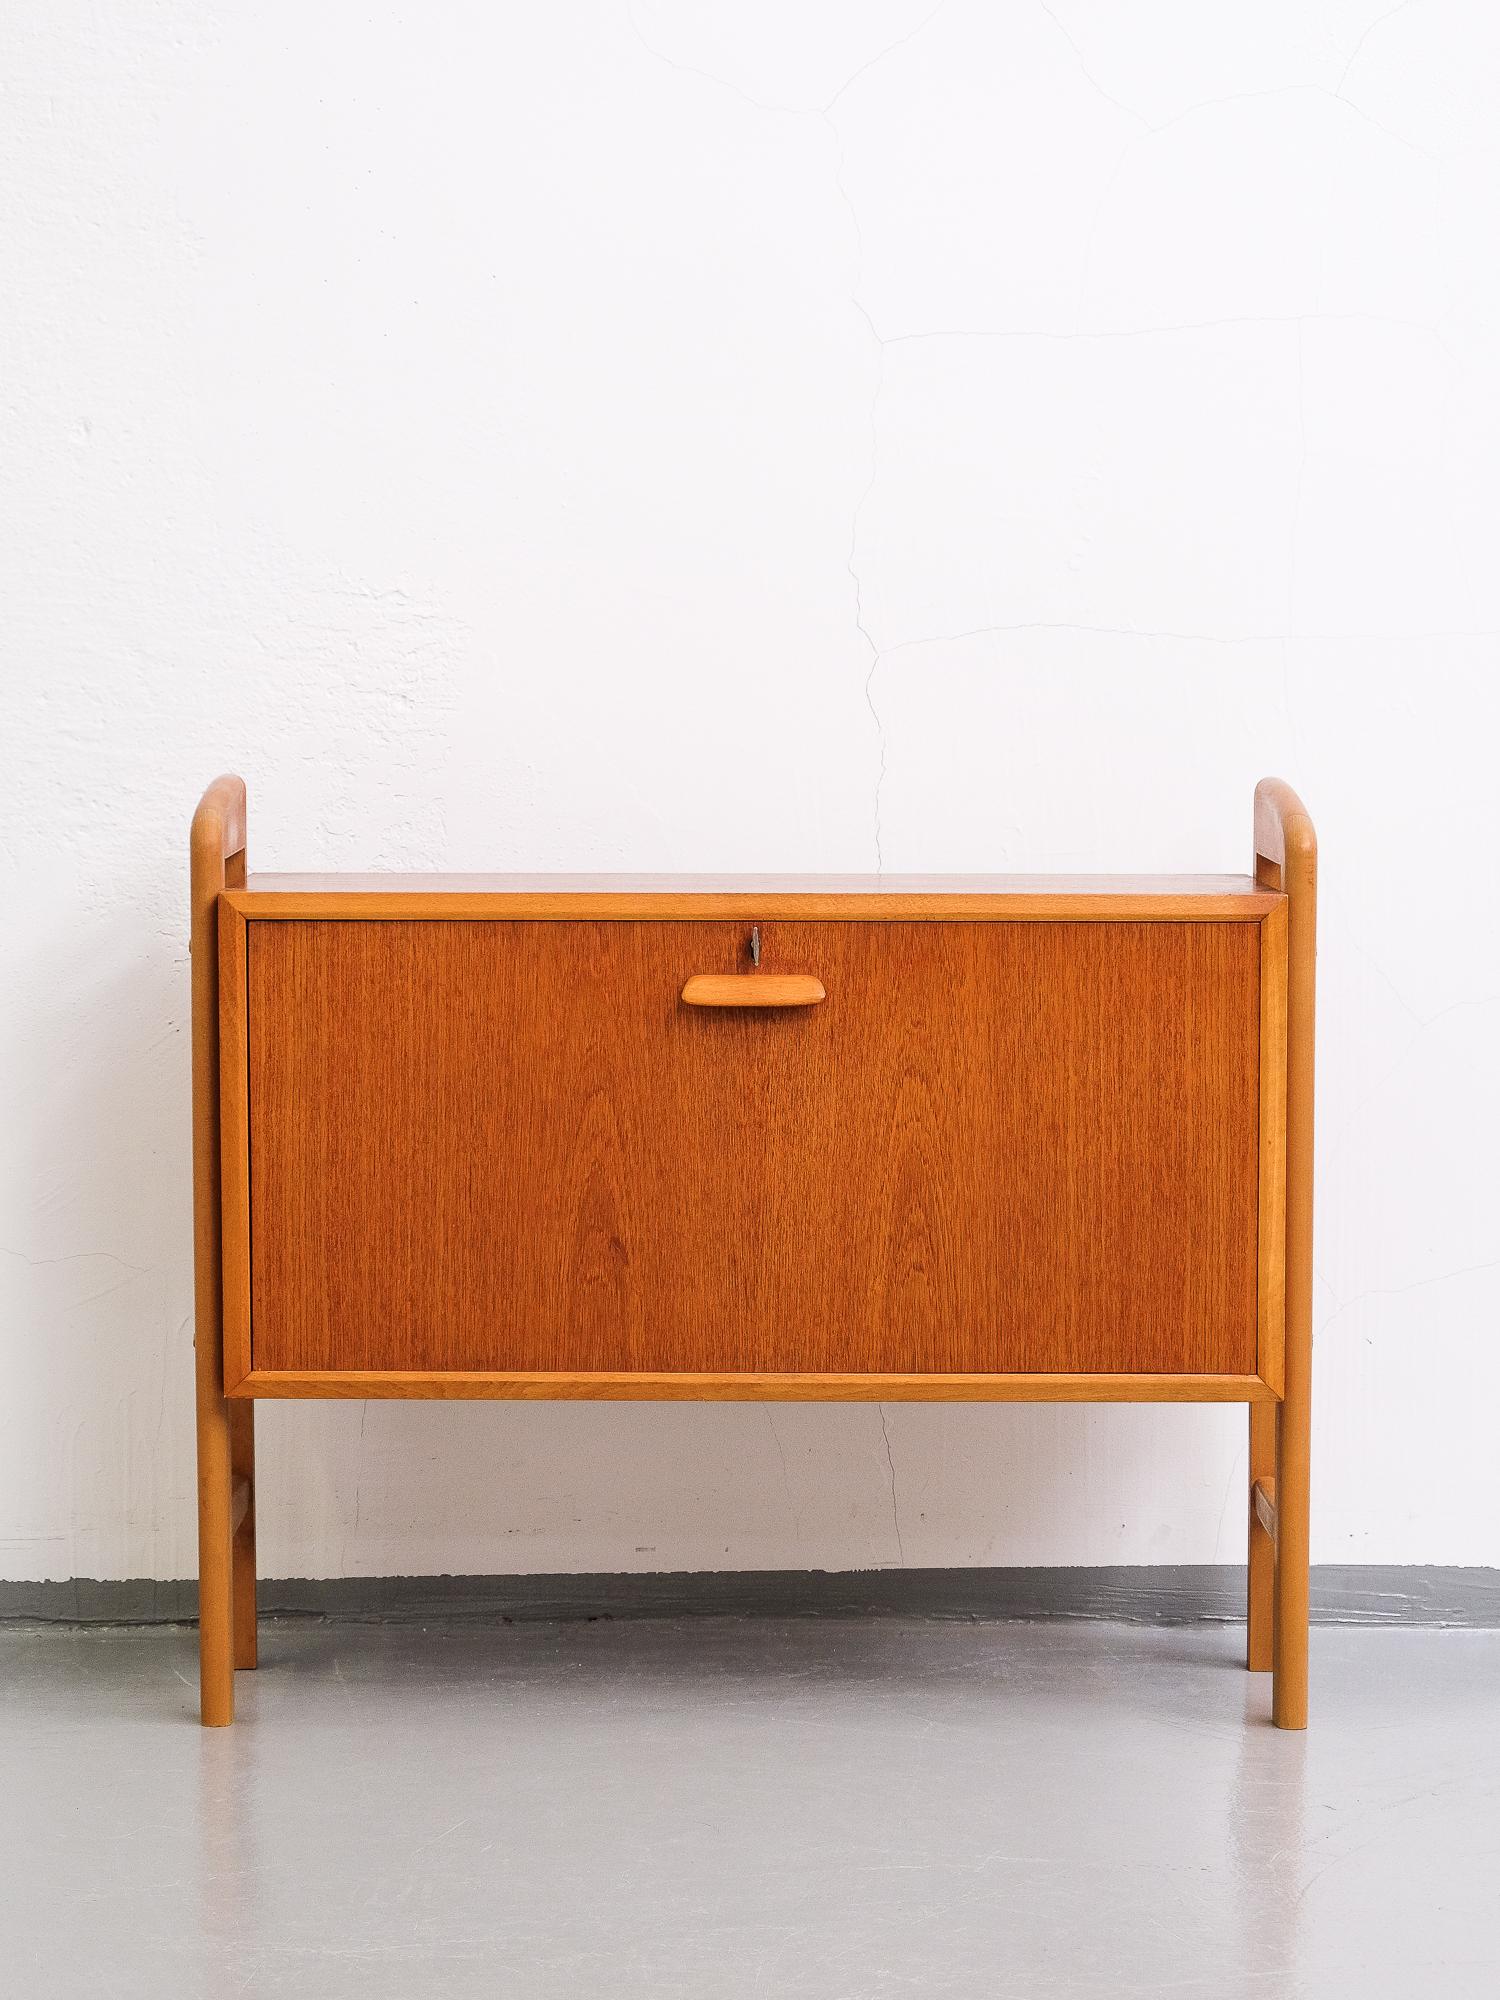 Nice little Scandinavian teak bar cabinet. A drop-down front opens onto a roomy interior with shelf, two little drawers, a mirrored back and a light.